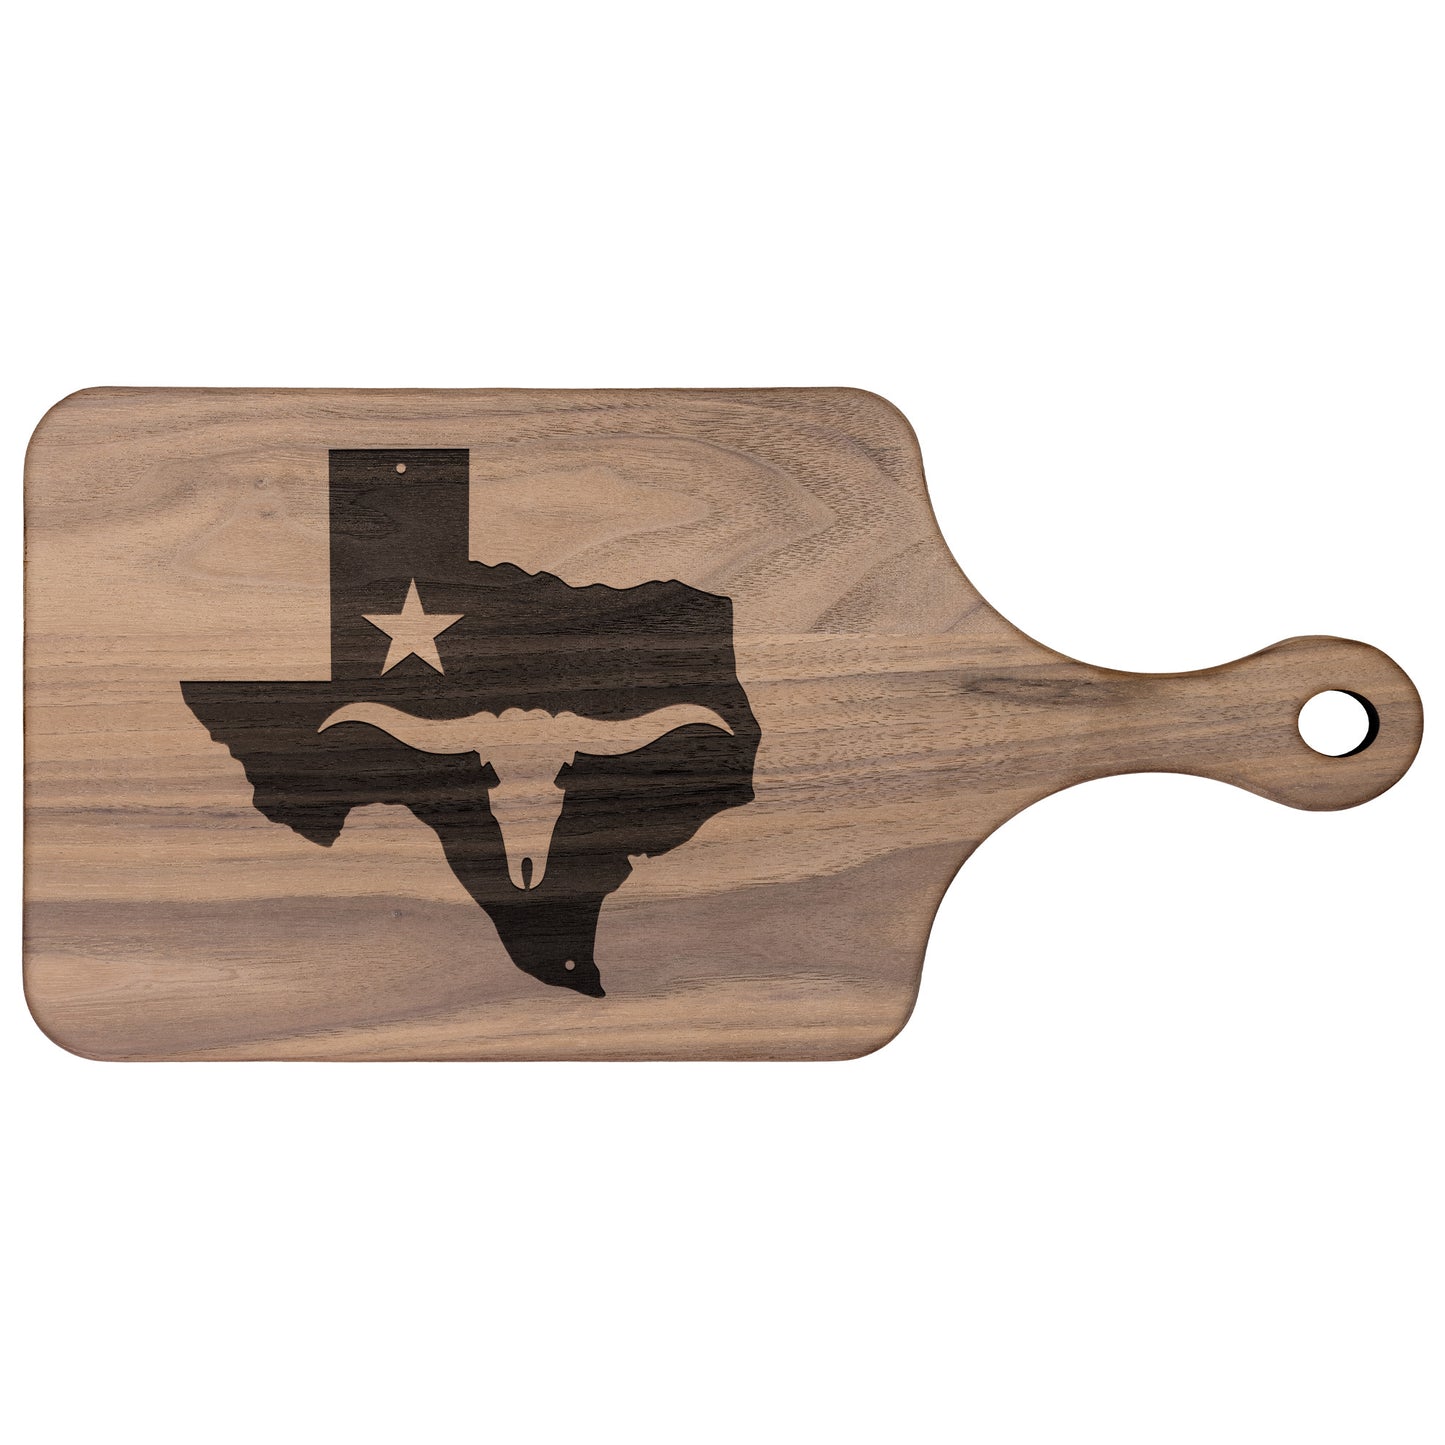 The Lone Star State Texas Hardwood Paddle Cutting Board